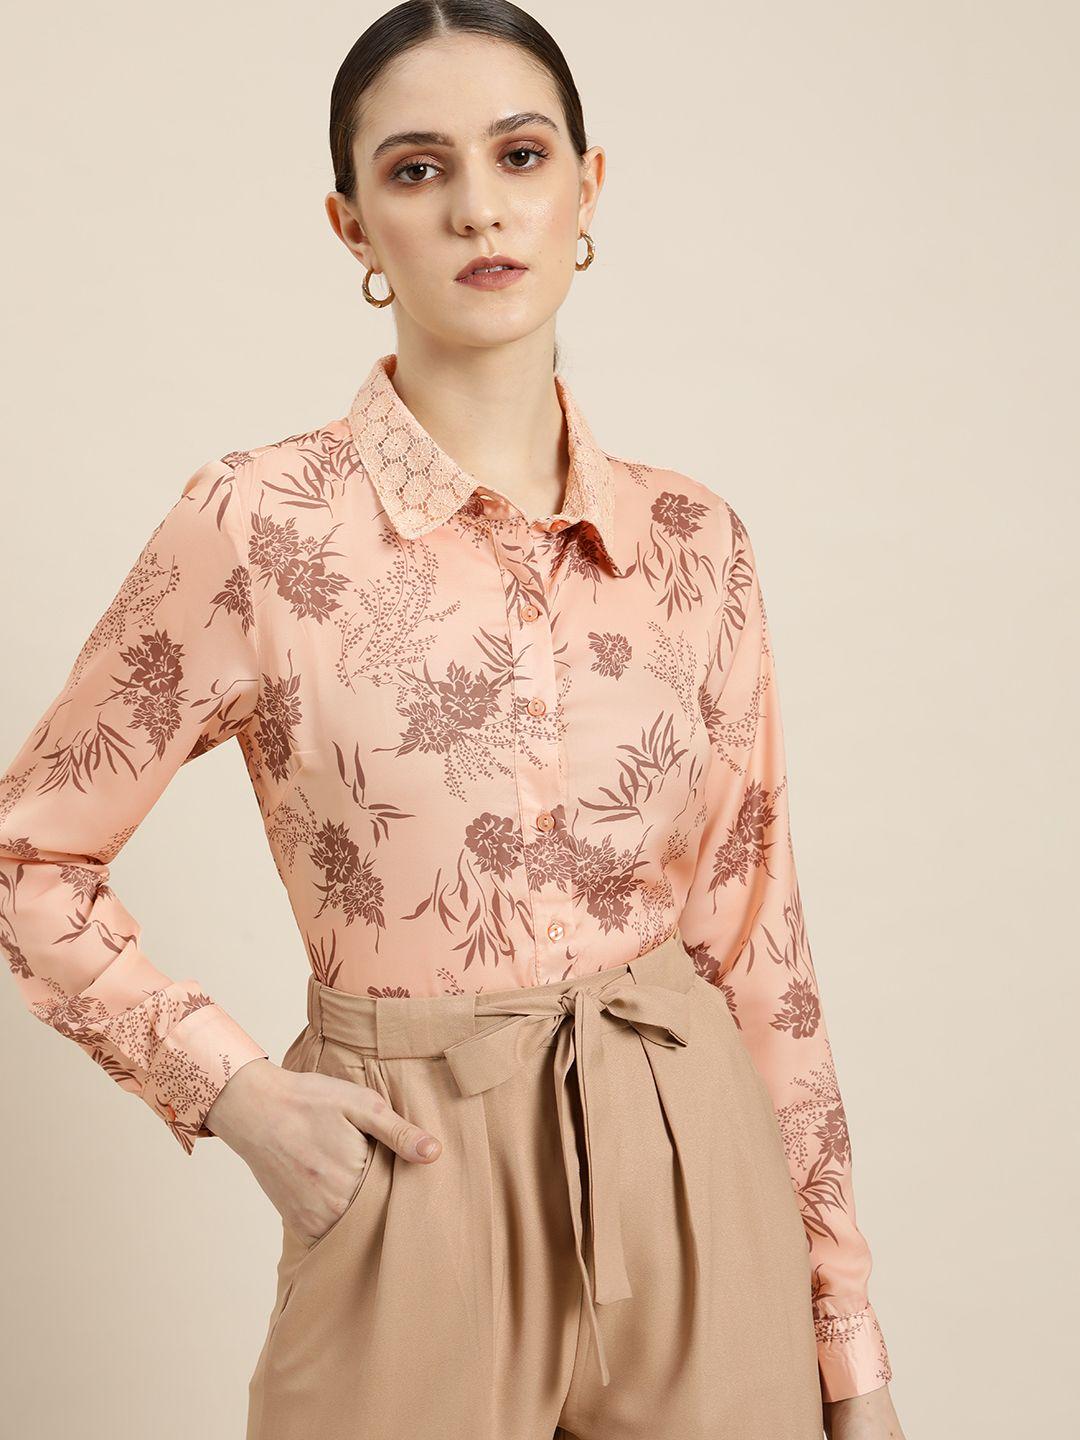 her-by-invictus-women-peach-coloured-&-brown-floral-printed-easy-iron-casual-shirt